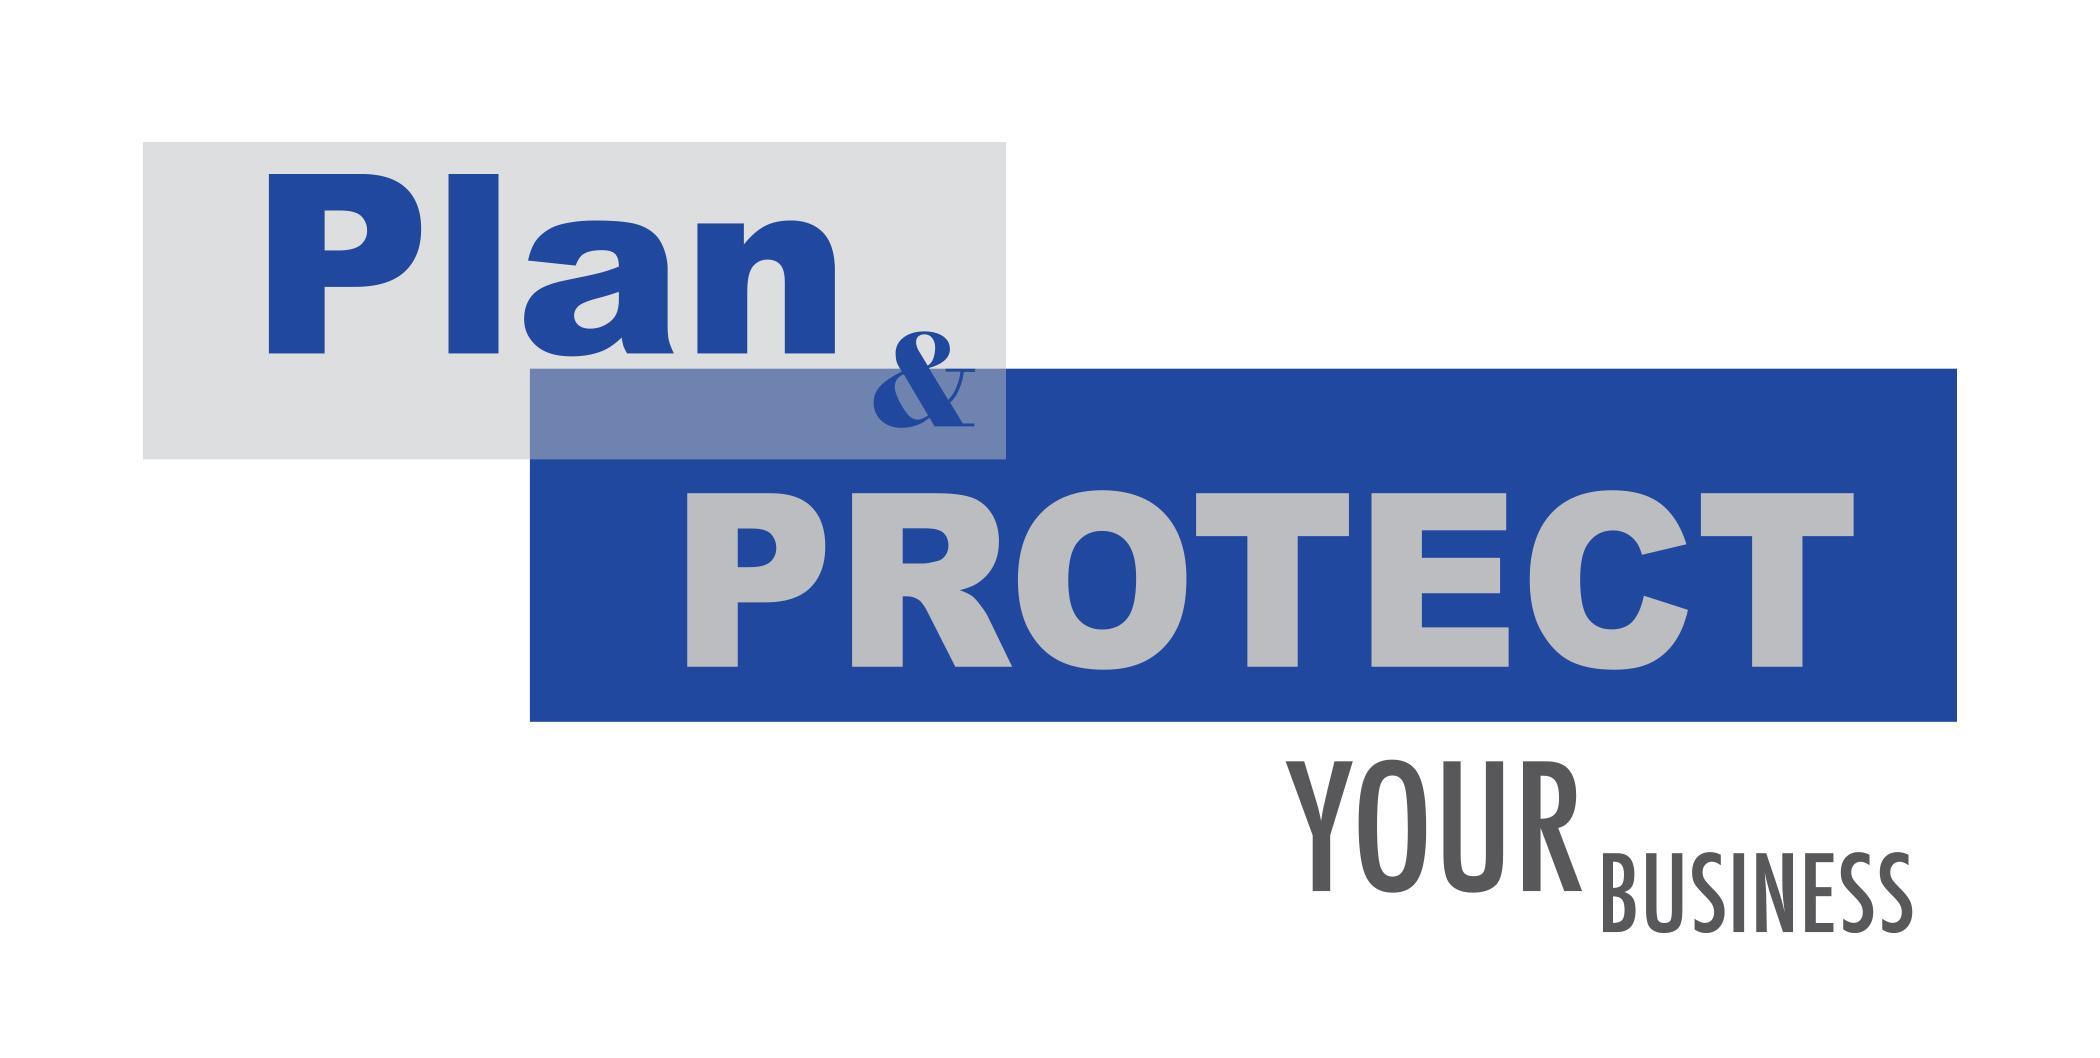  HOW TO GROW AND PROTECT YOUR BUSINESS WEBCAST (NM)